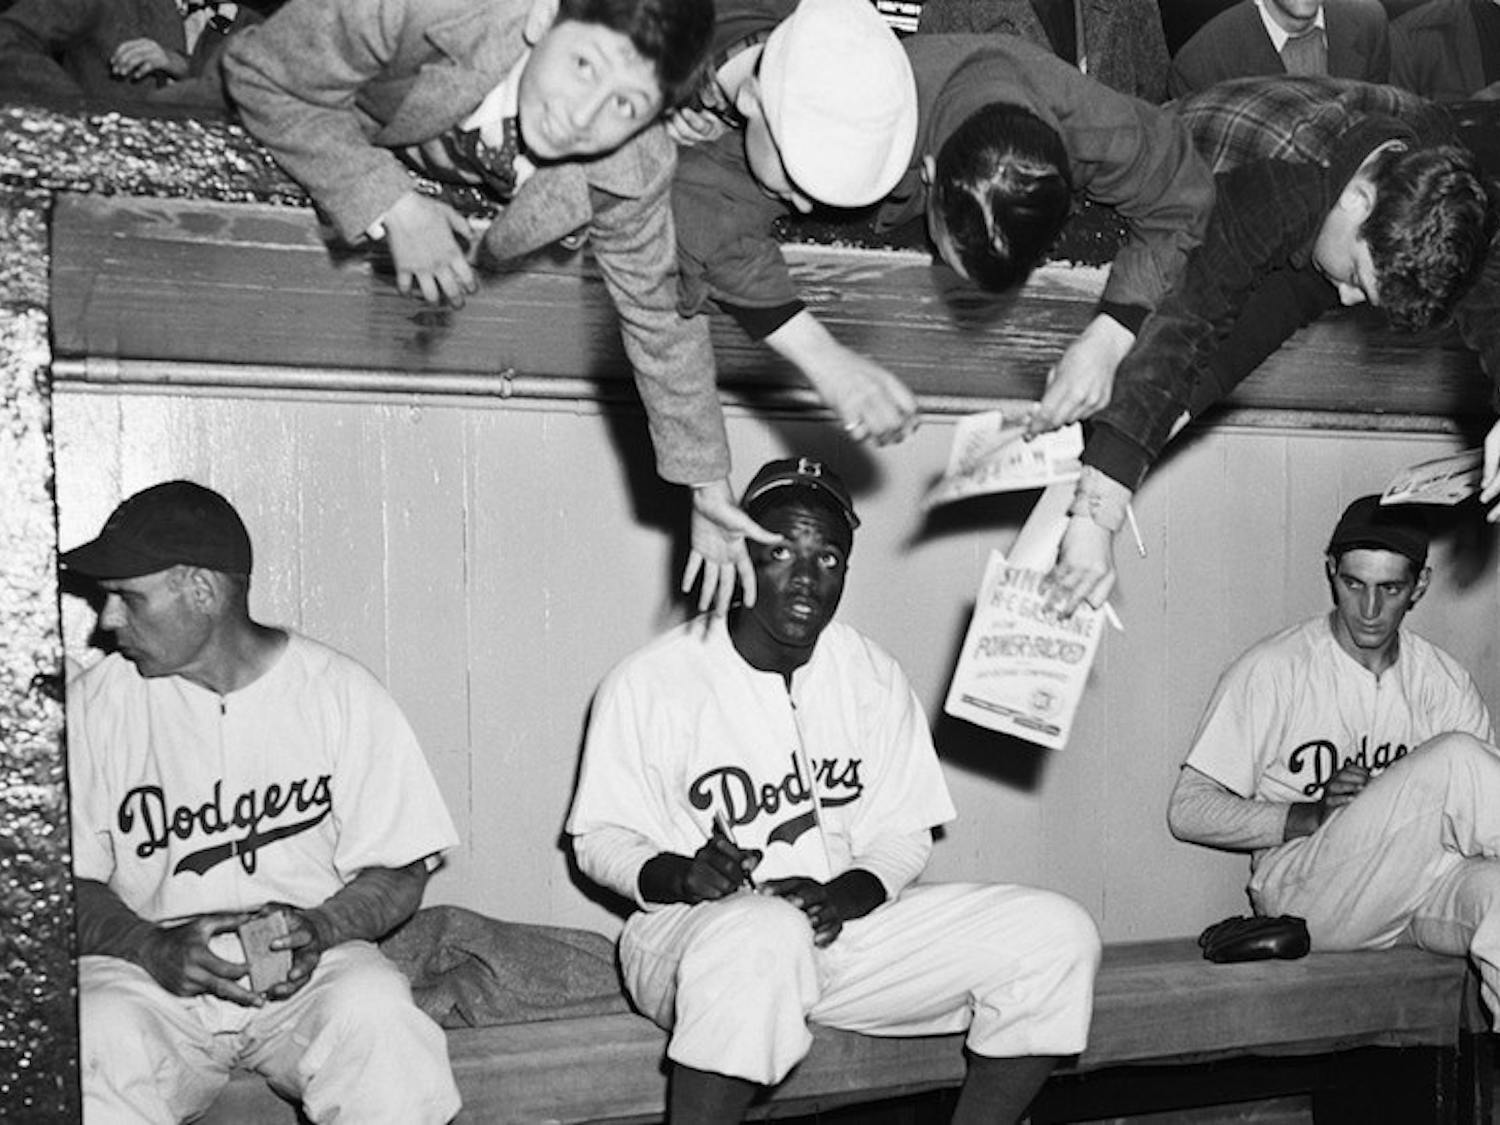 Eddie Dweck, the first child on the left, gets an item signed by Jackie Robinson prior to an exhibition game on April 11th, 1947. Robinson would break Major League Baseball’s color barrier four days later. Photo courtesy of Corbis Images 